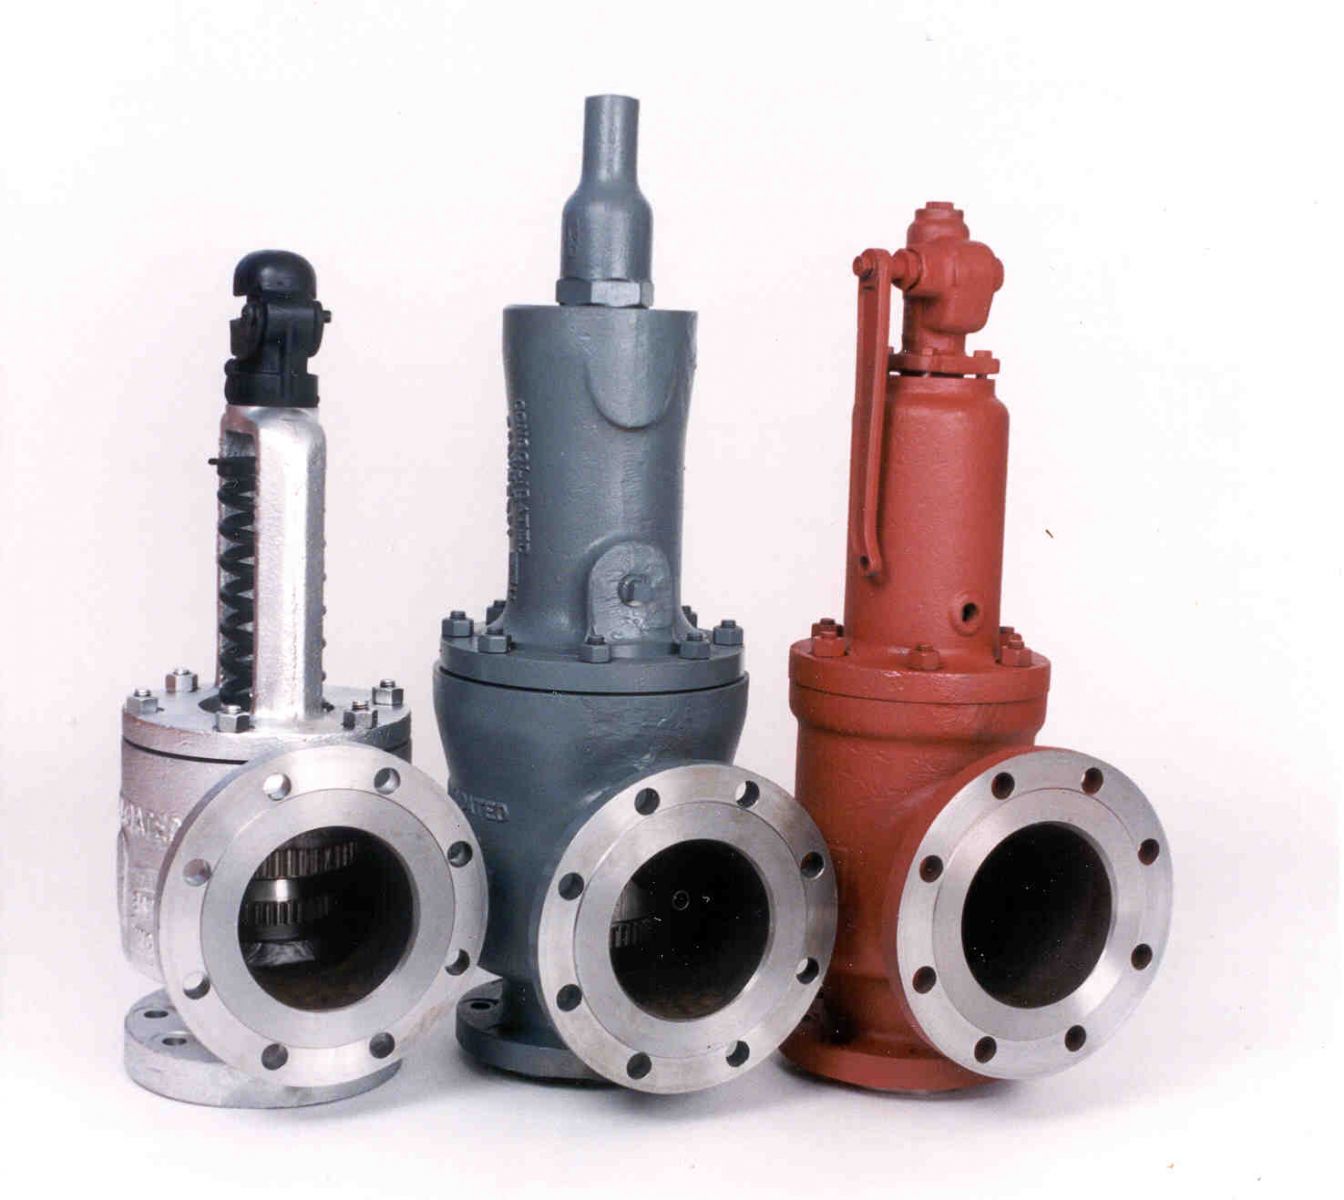 Selection of Safety Valves in Different Areas